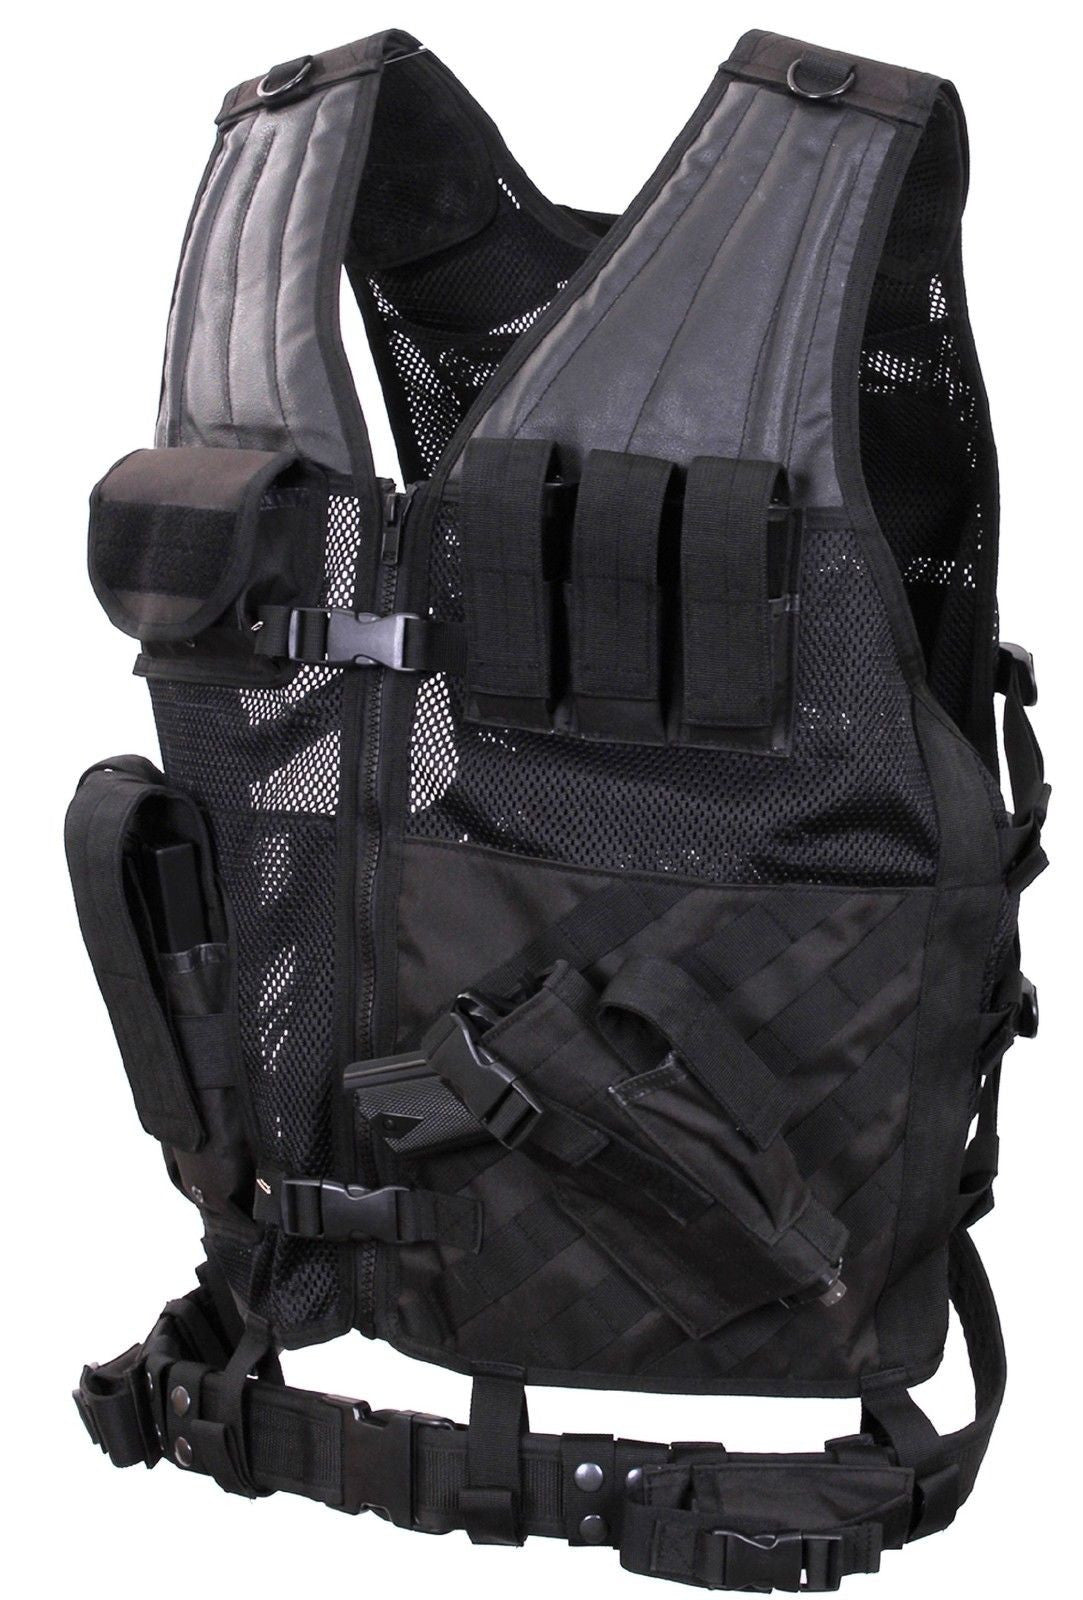 Rothco Black Oversized Cross-Draw Tactical Vest MOLLE Law Enforcement Vests